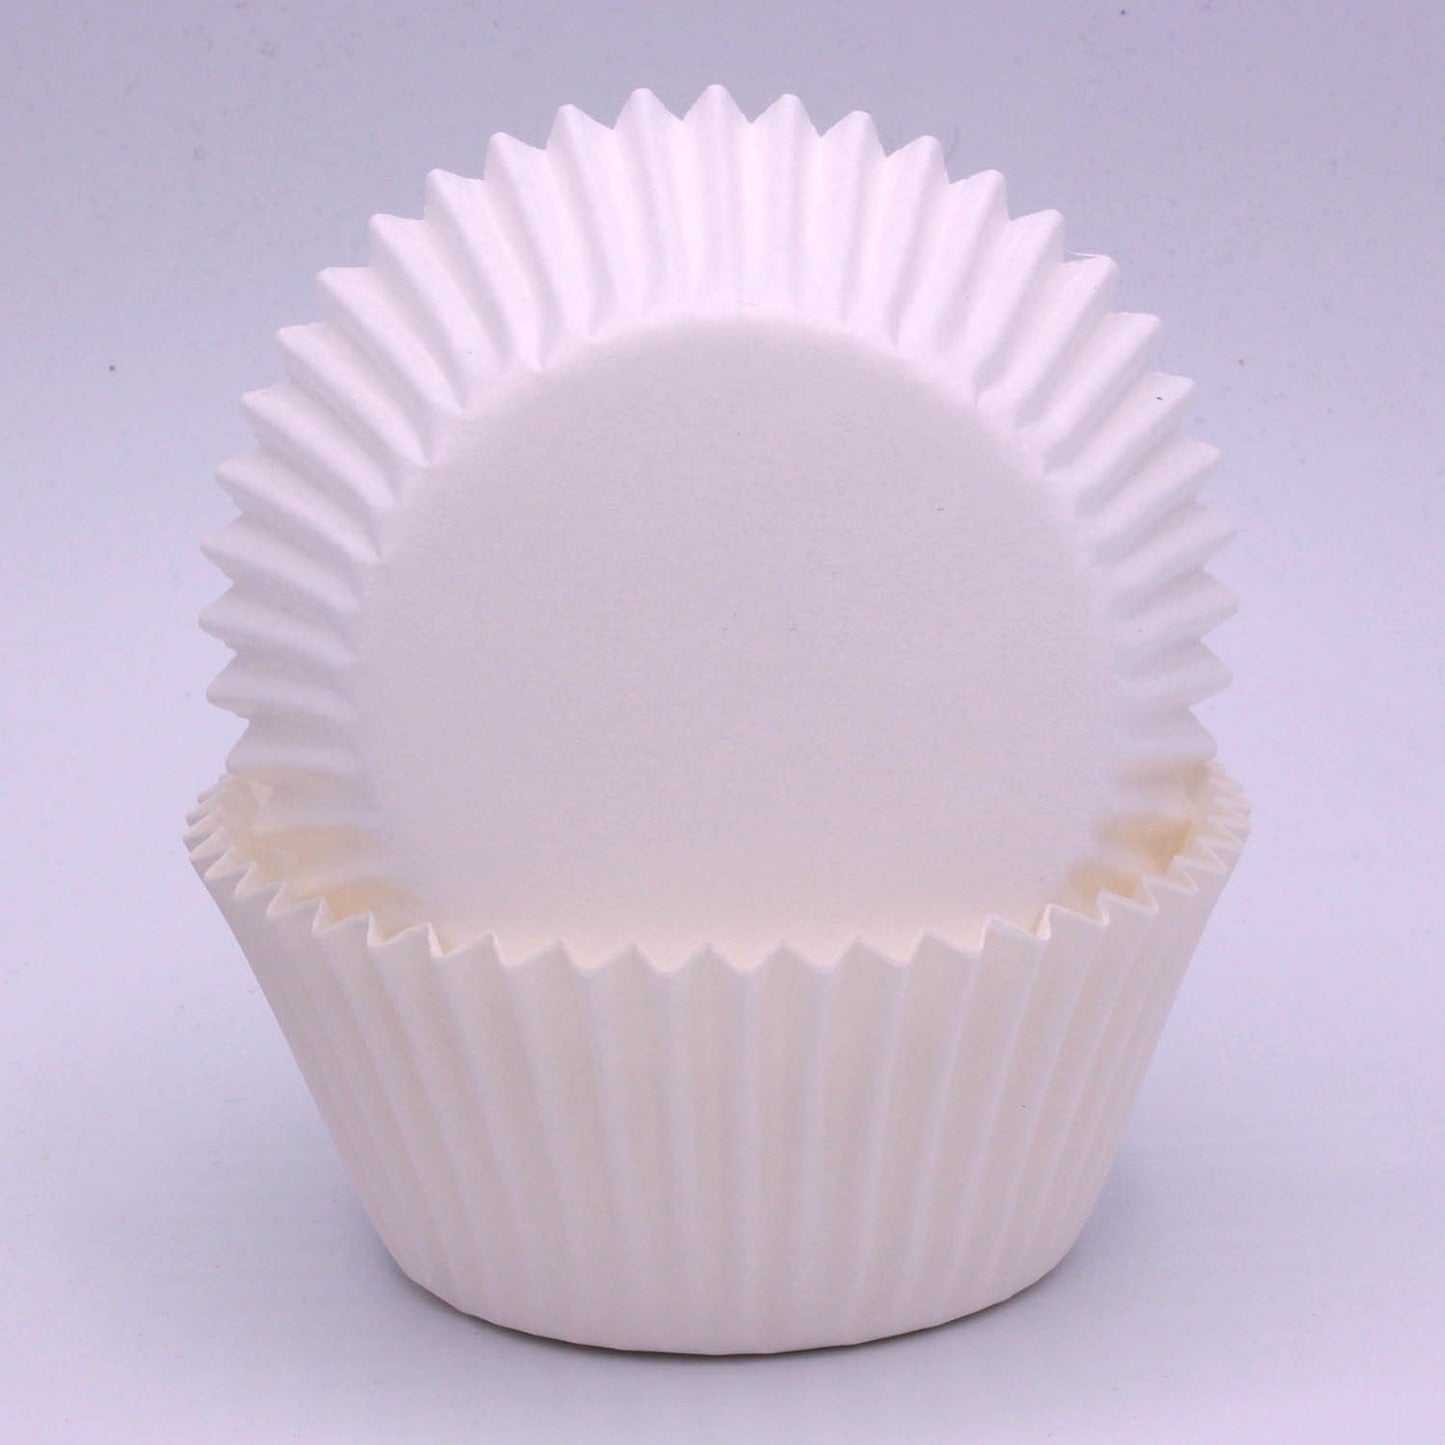 390 - White cupcake papers